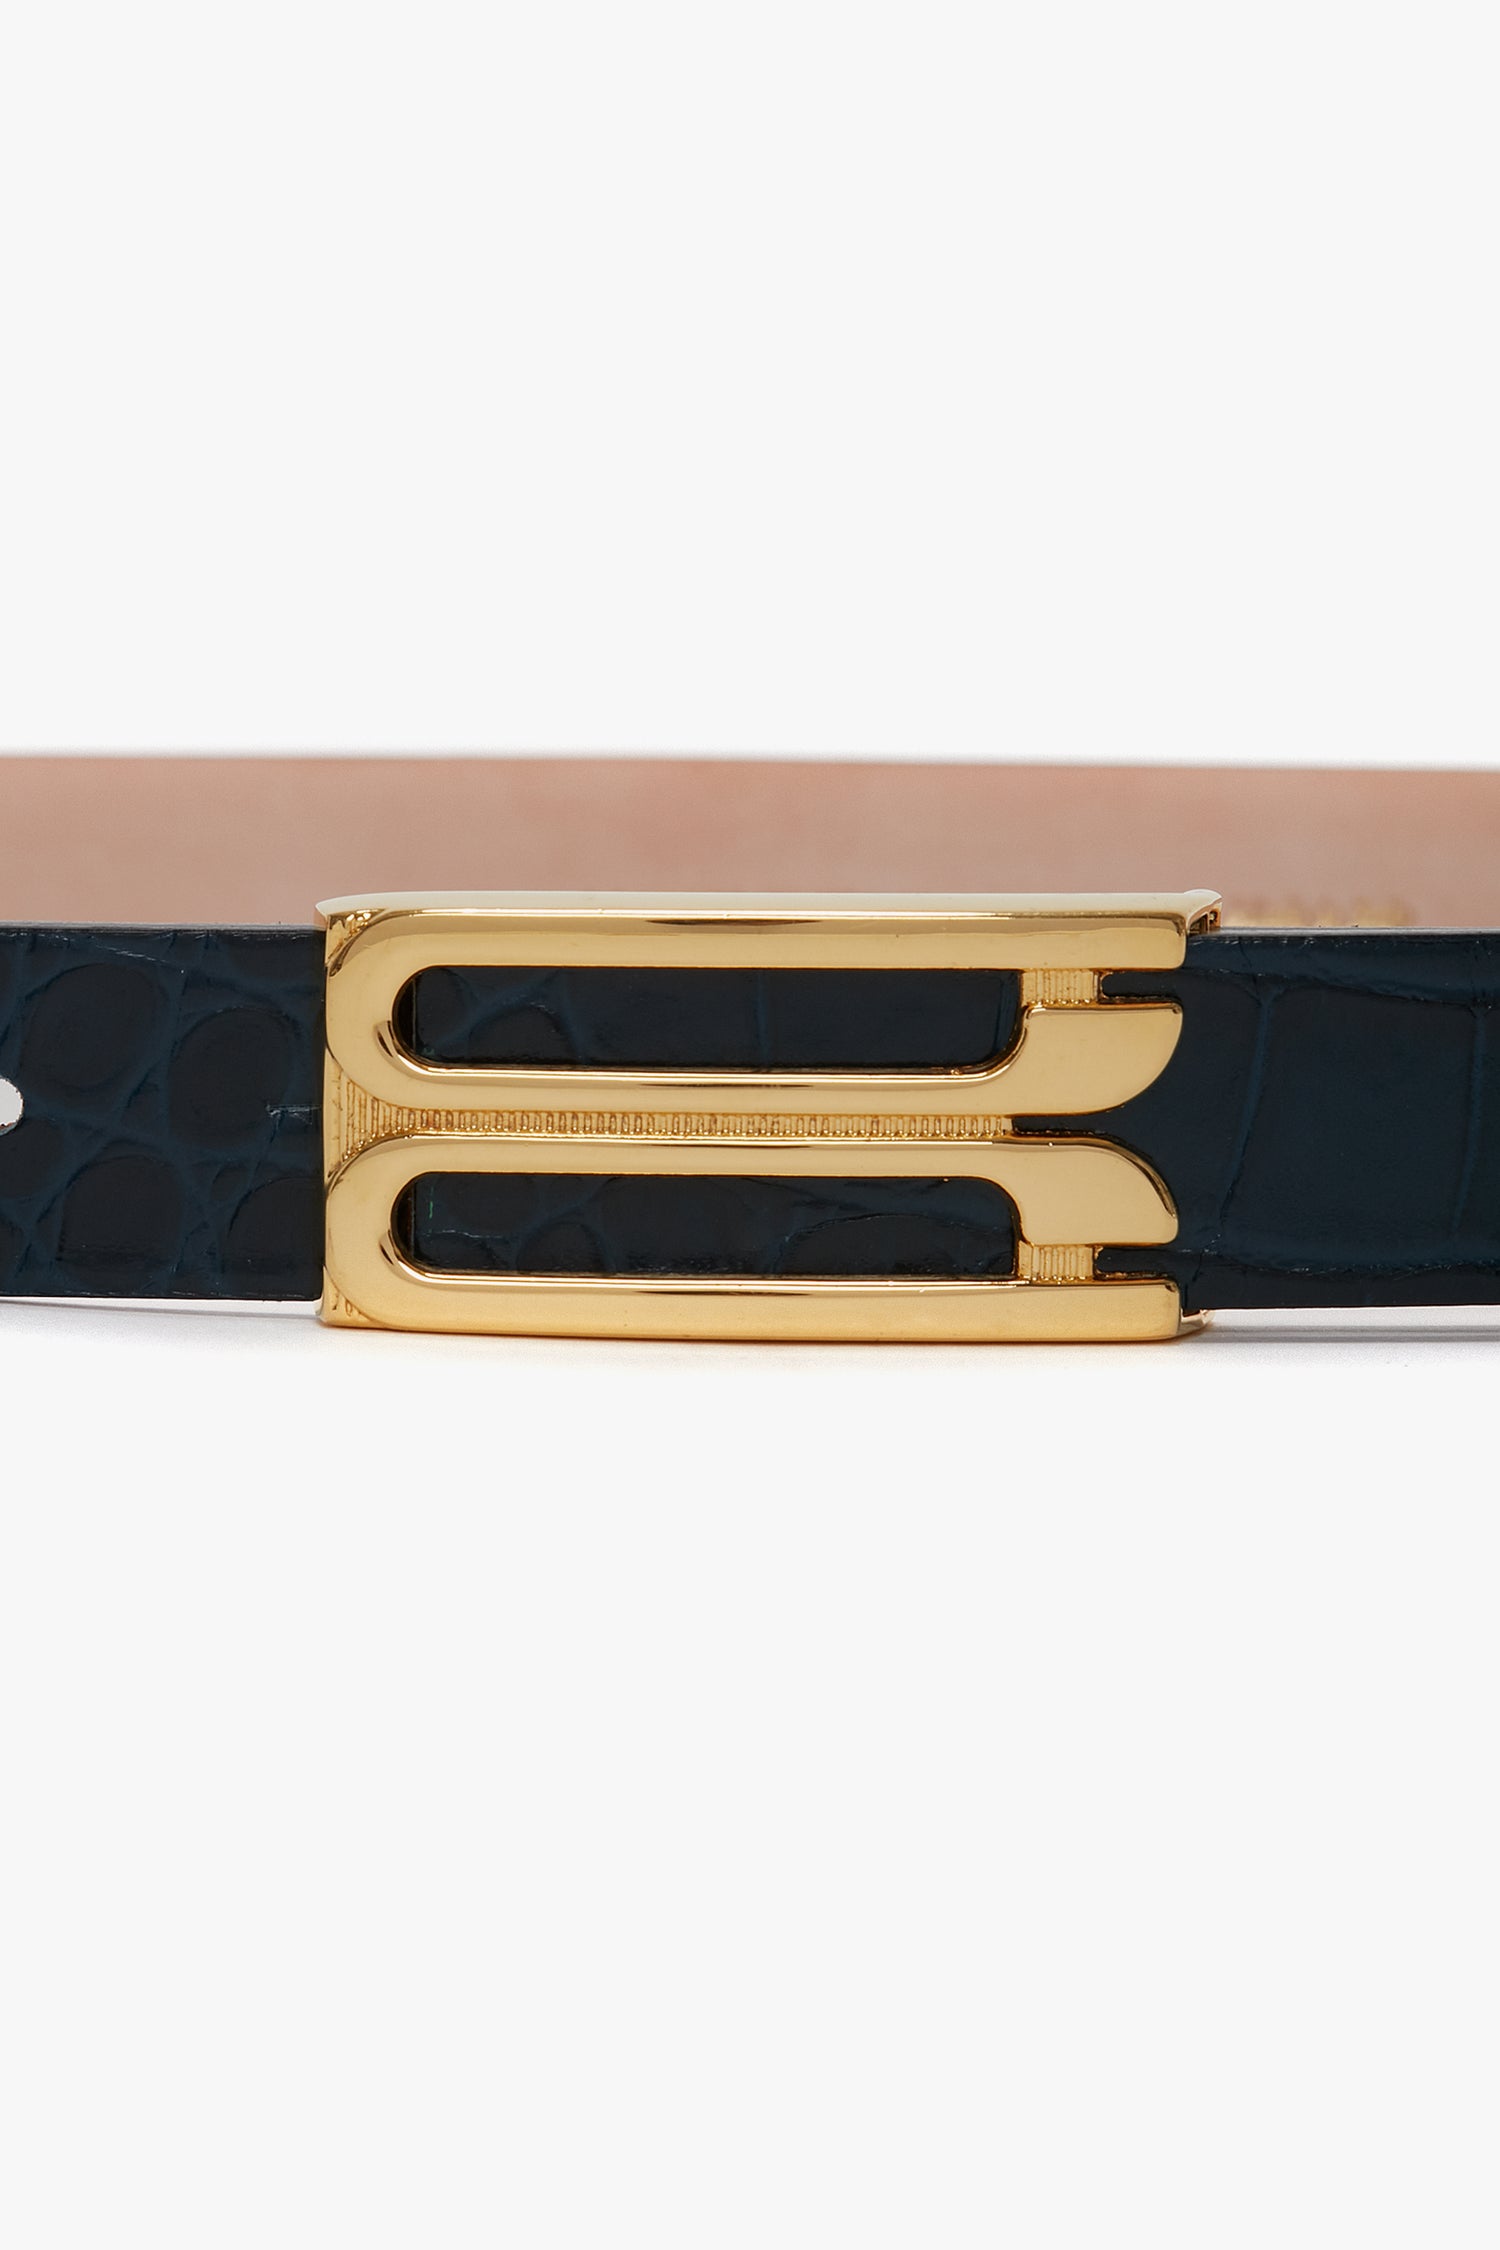 A close-up of a belt buckle attached to a Victoria Beckham Frame Belt In Midnight Blue Croc Embossed Calf Leather. The gold hardware buckle features a geometric design, and the belt has a light tan underside.